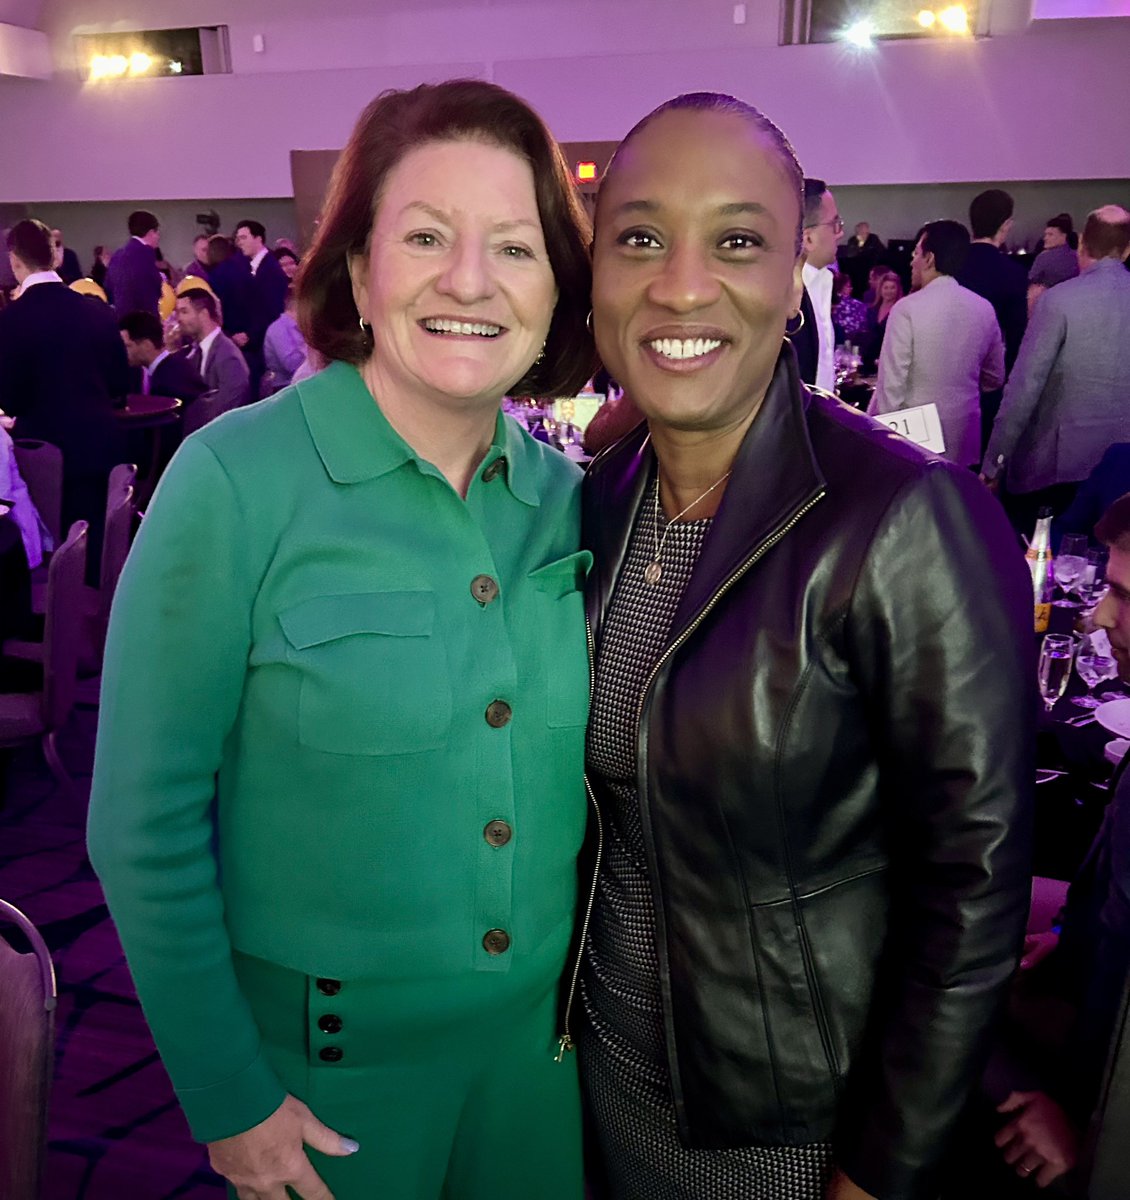 It was great to see US Senator @LaphonzaB at @VictoryFund! She’s a trailblazer and incredible advocate for California, and I’m grateful to work alongside her on behalf of our state!